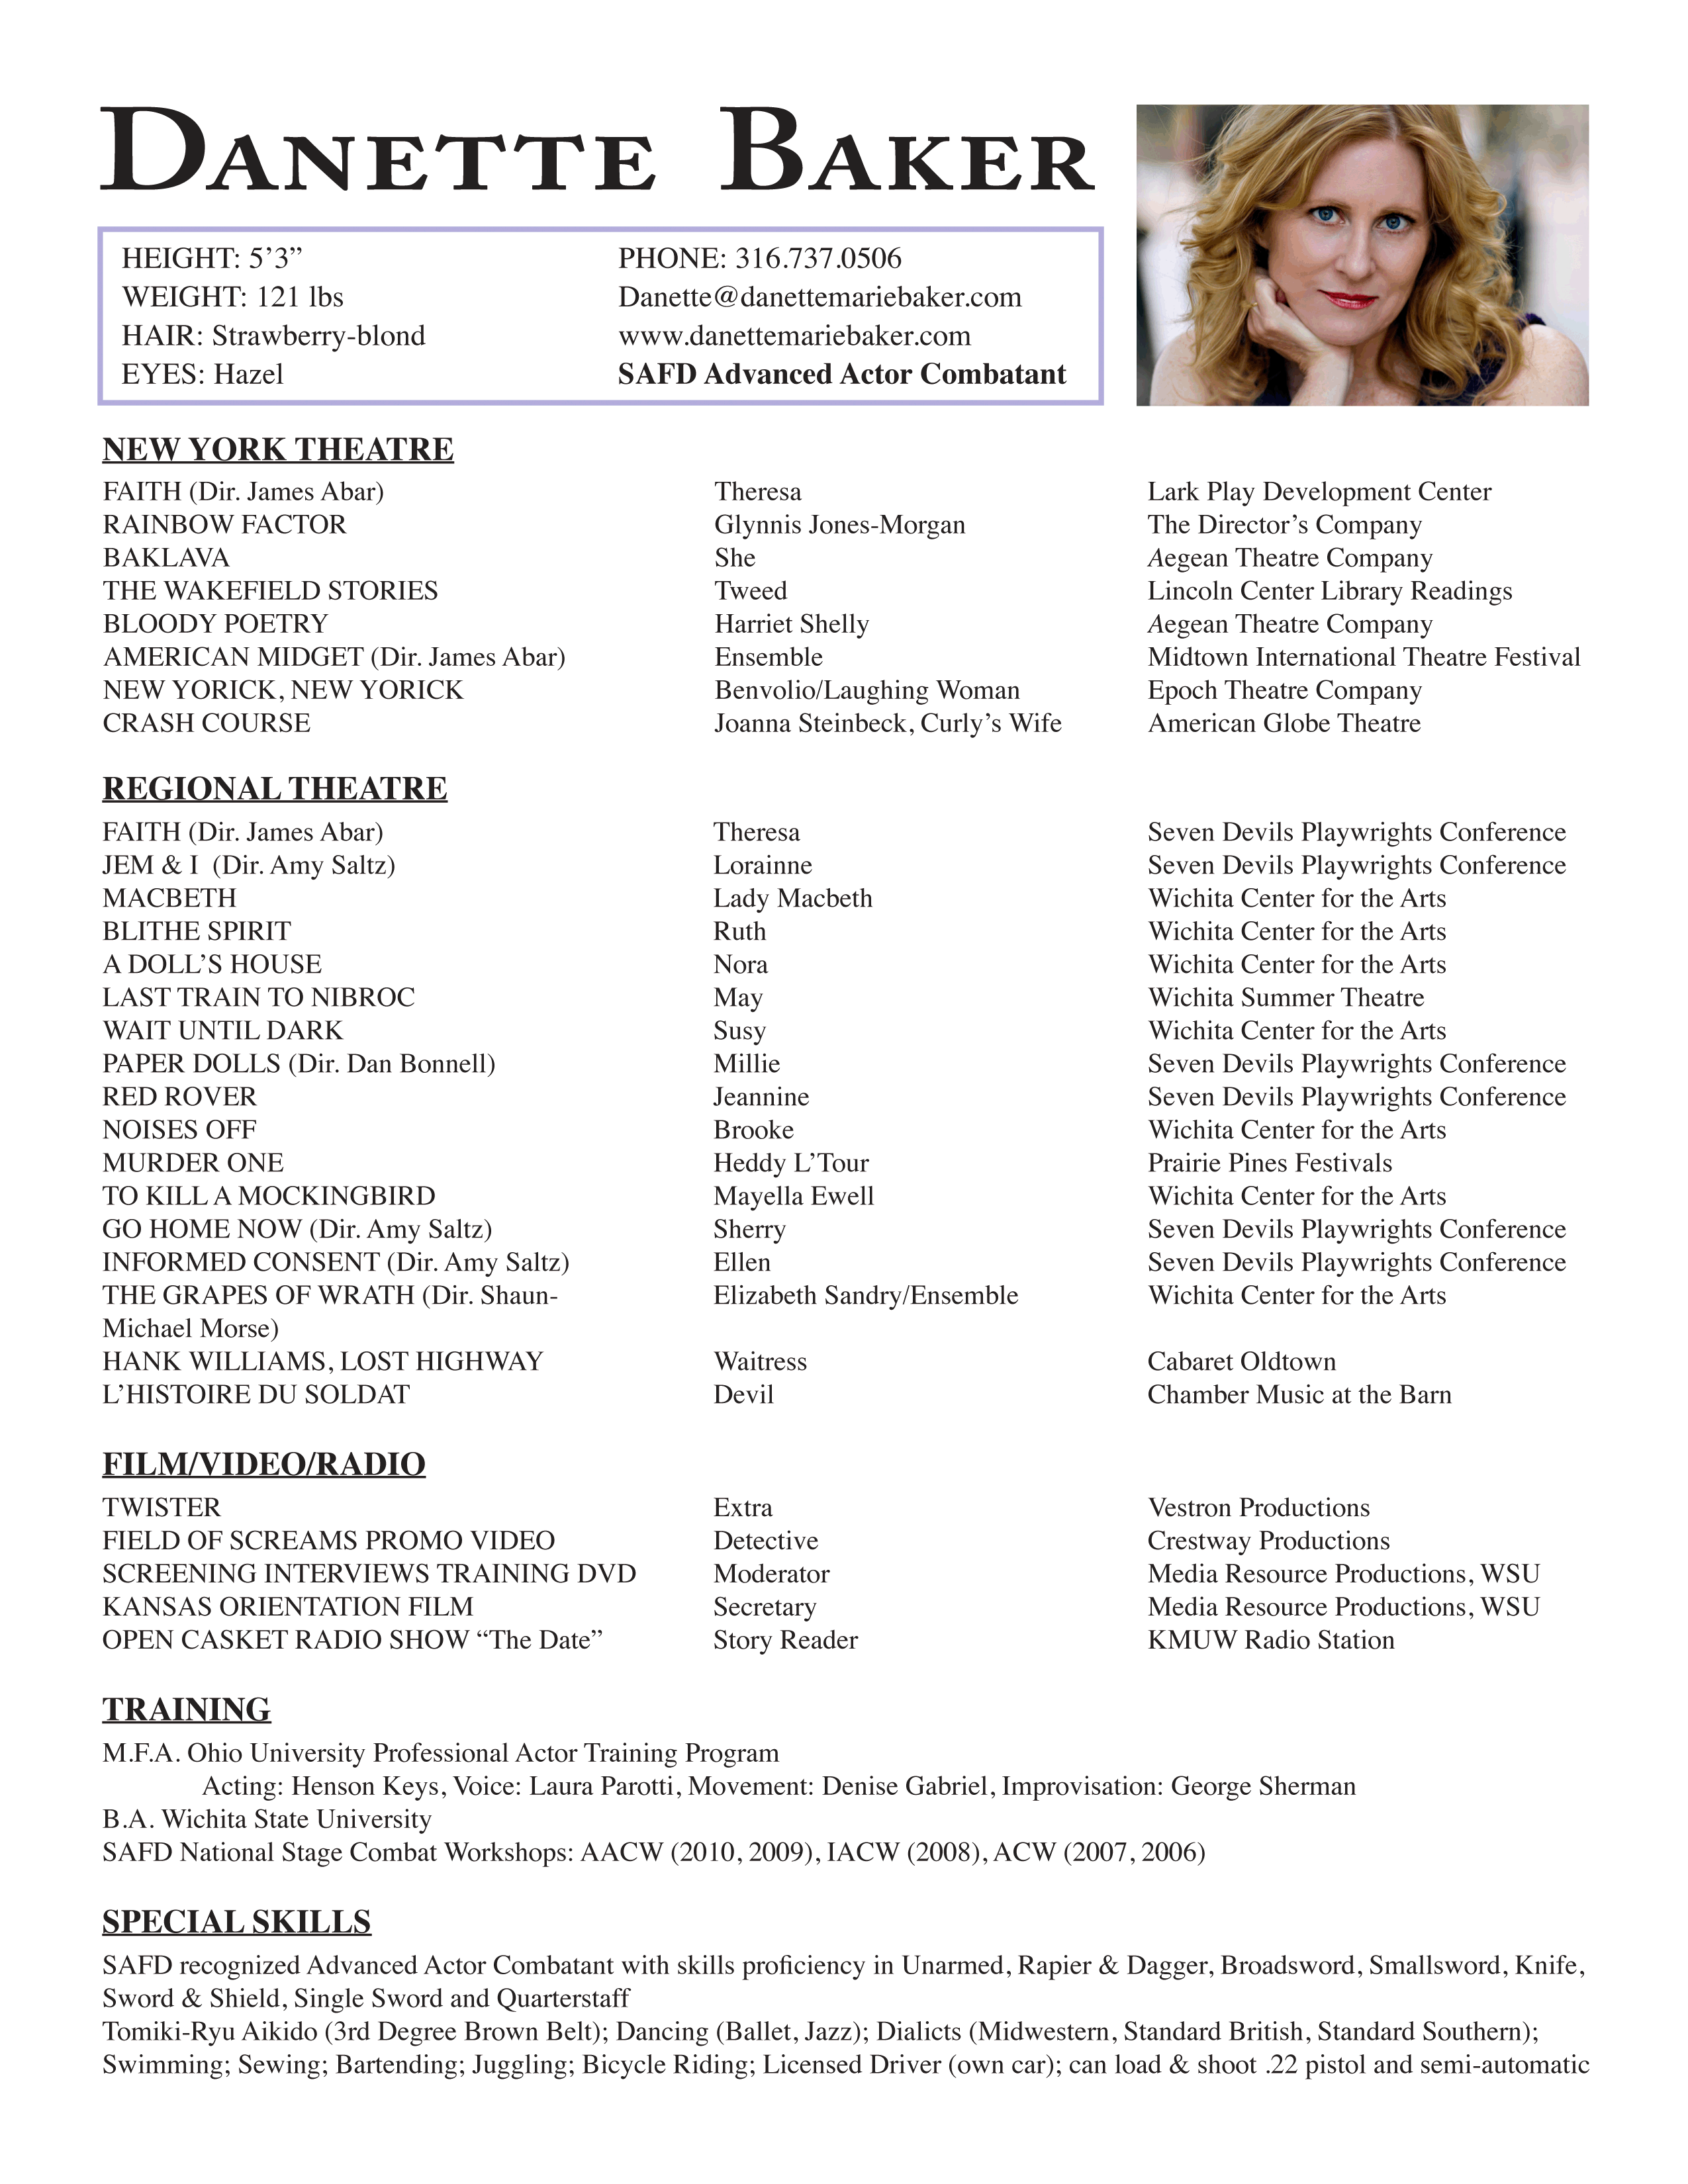 resume to get an acting agent example